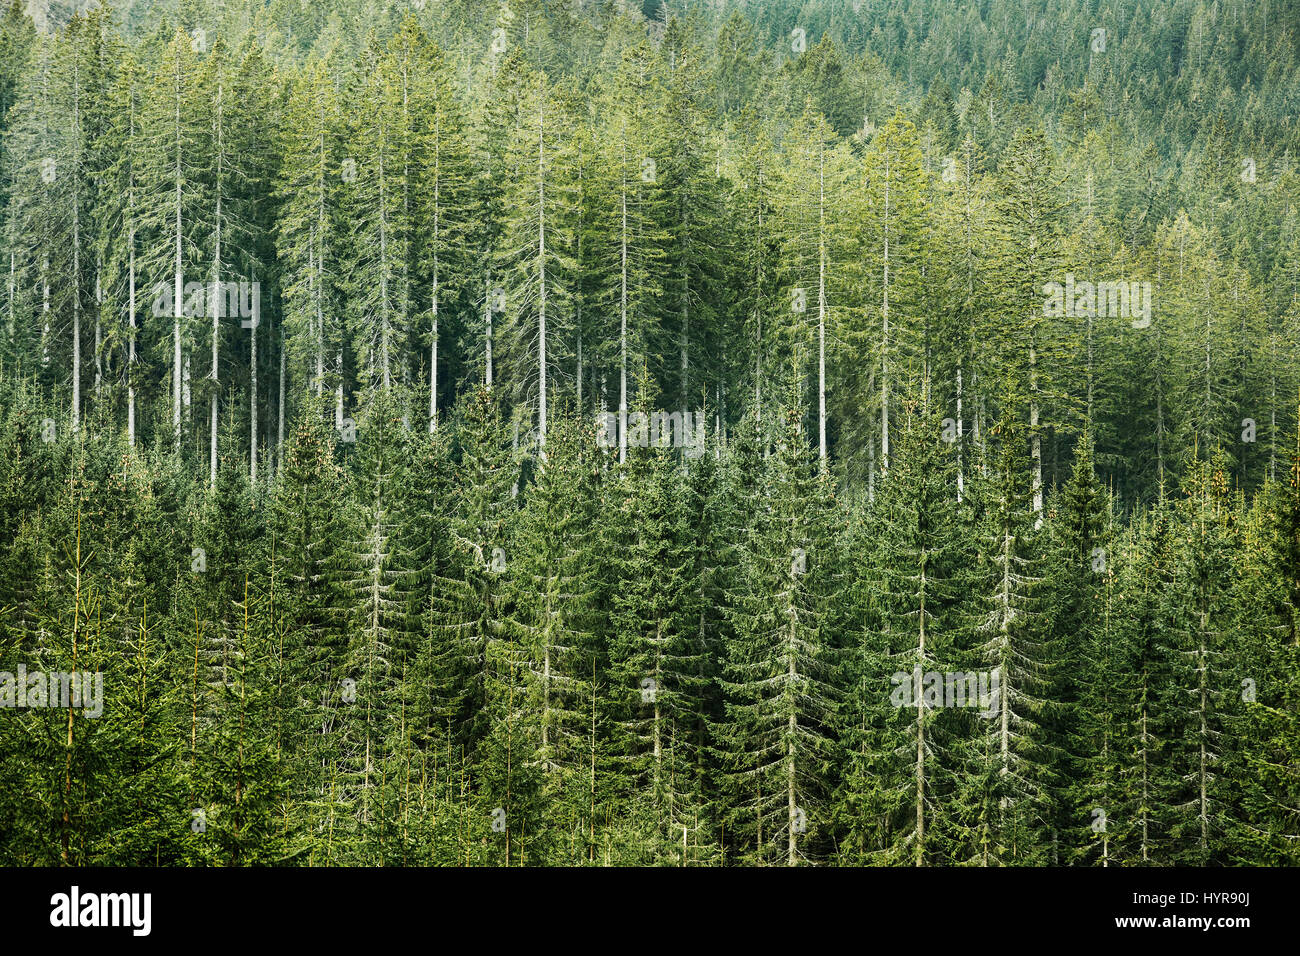 Healthy, green coniferous forest with old spruce, fir and pine trees in wilderness area of a national park. Sustainable industry, ecosystem and health Stock Photo